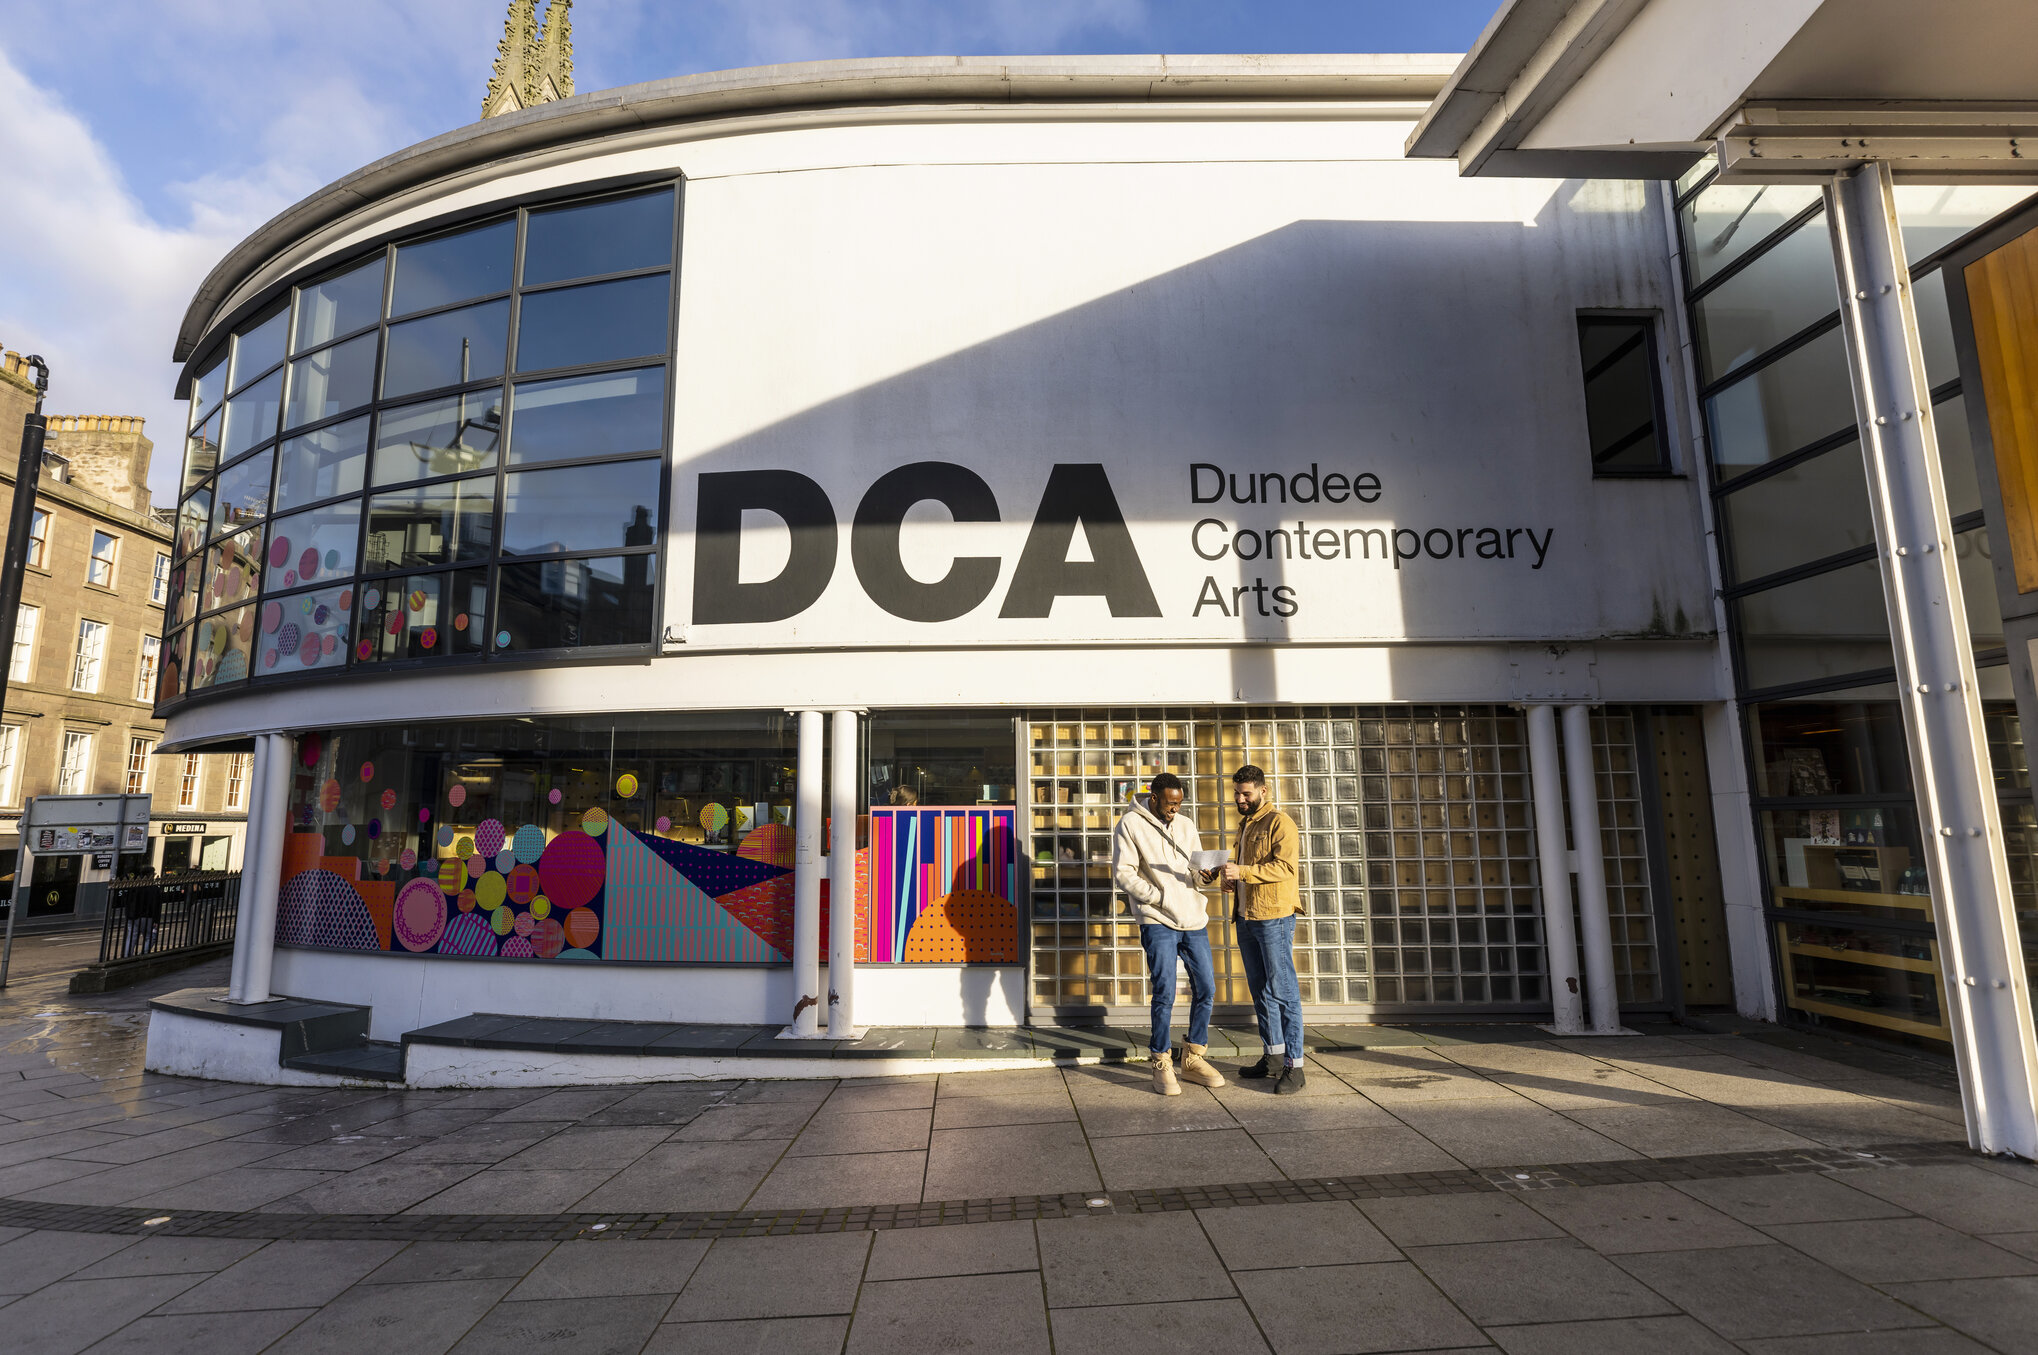 The exterior of Dundee Contemporary Arts (DCA)